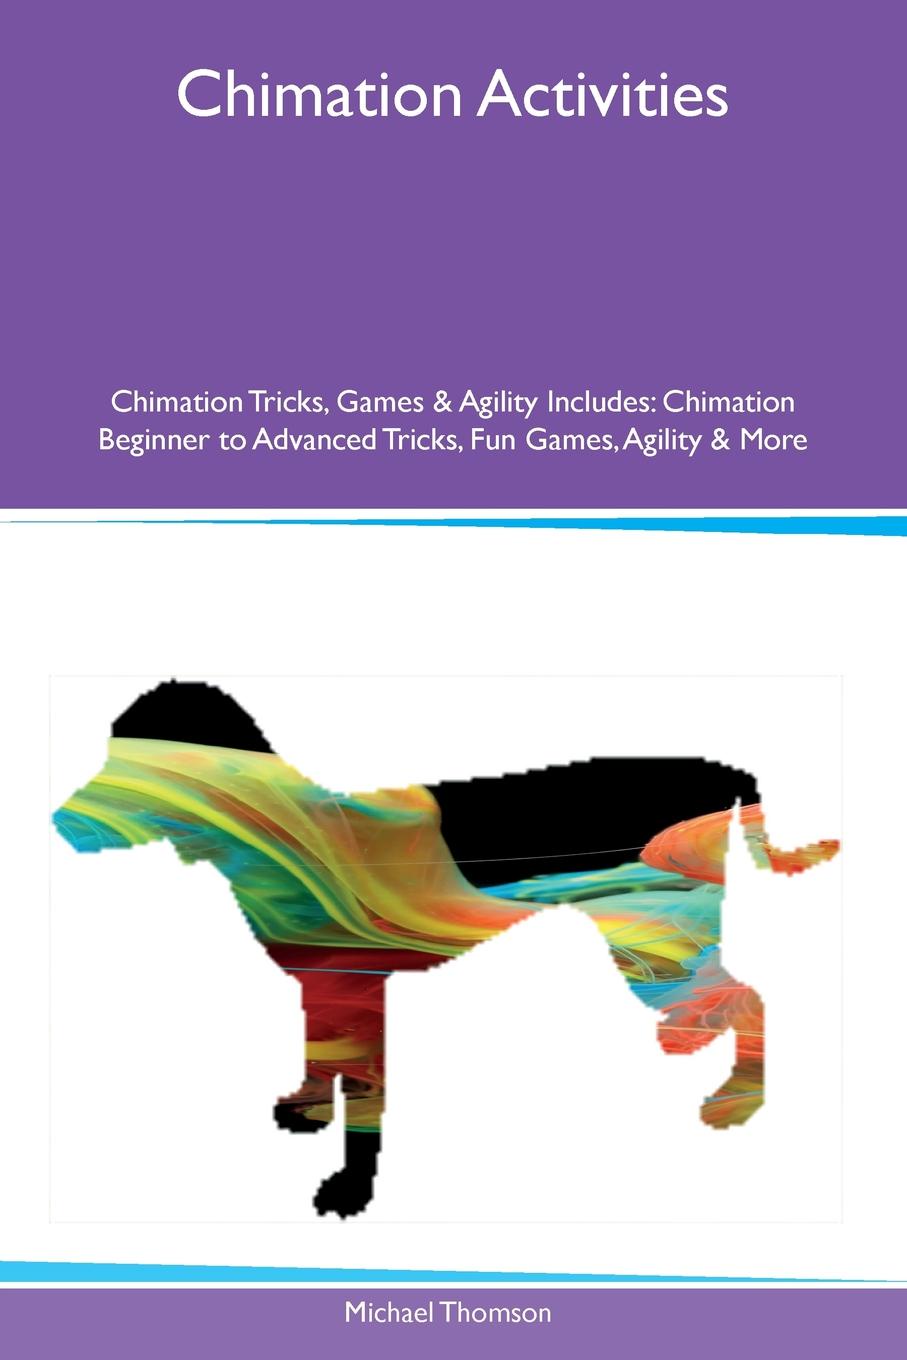 Chimation Activities Chimation Tricks, Games & Agility Includes. Chimation Beginner to Advanced Tricks, Fun Games, Agility & More